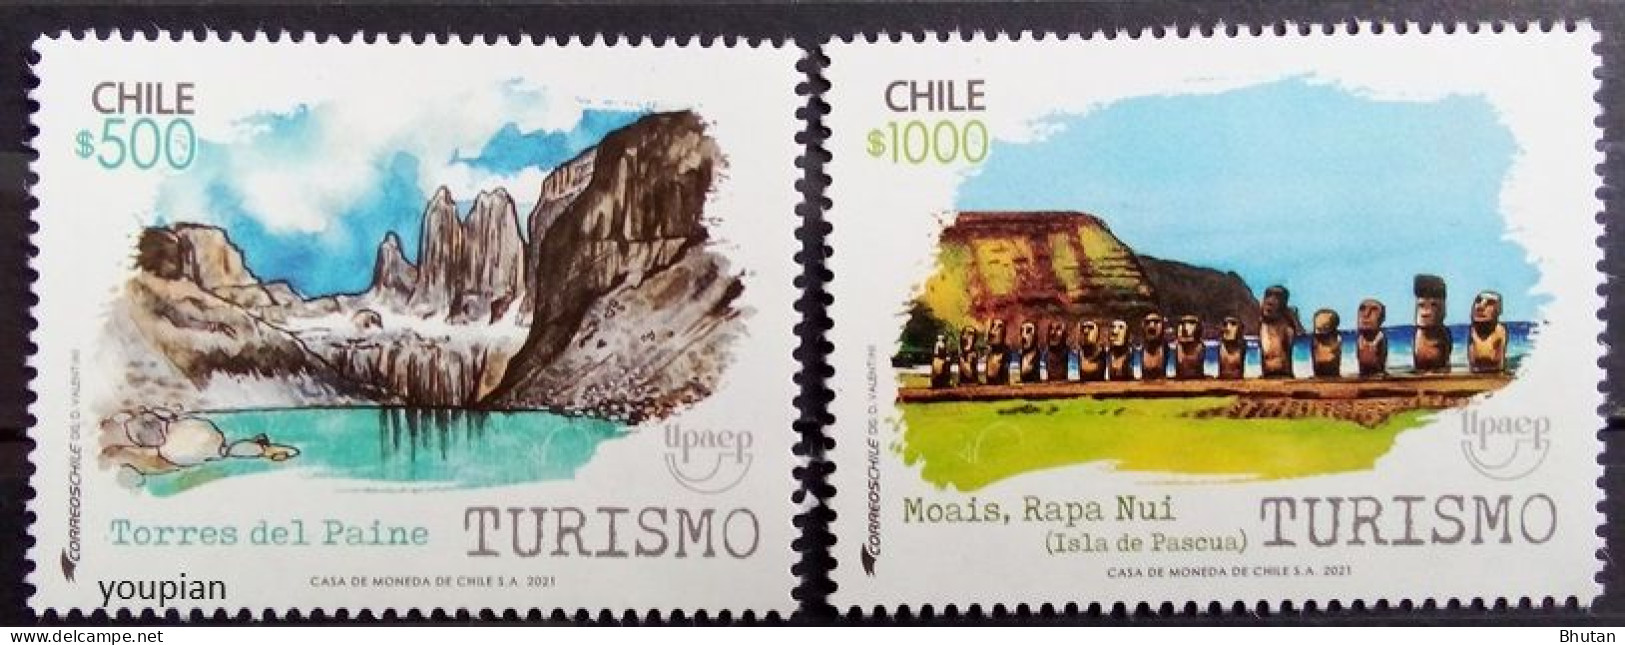 Chile 2021, UPAEP - Tourism, MNH Stamps Strip - Chile